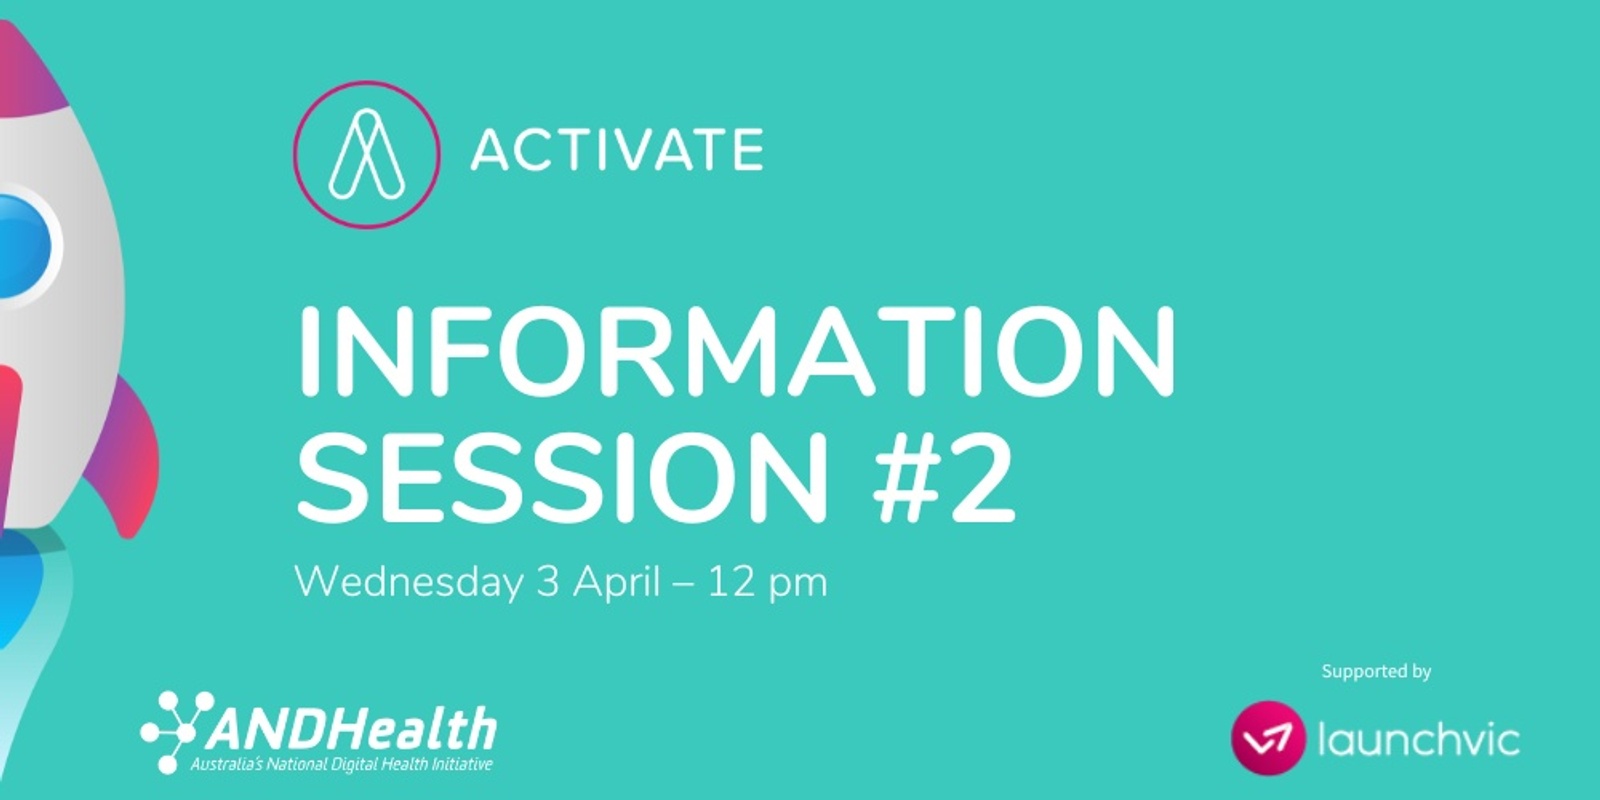 Banner image for ANDHealth ACTIVATE Information Session for Applicants #2